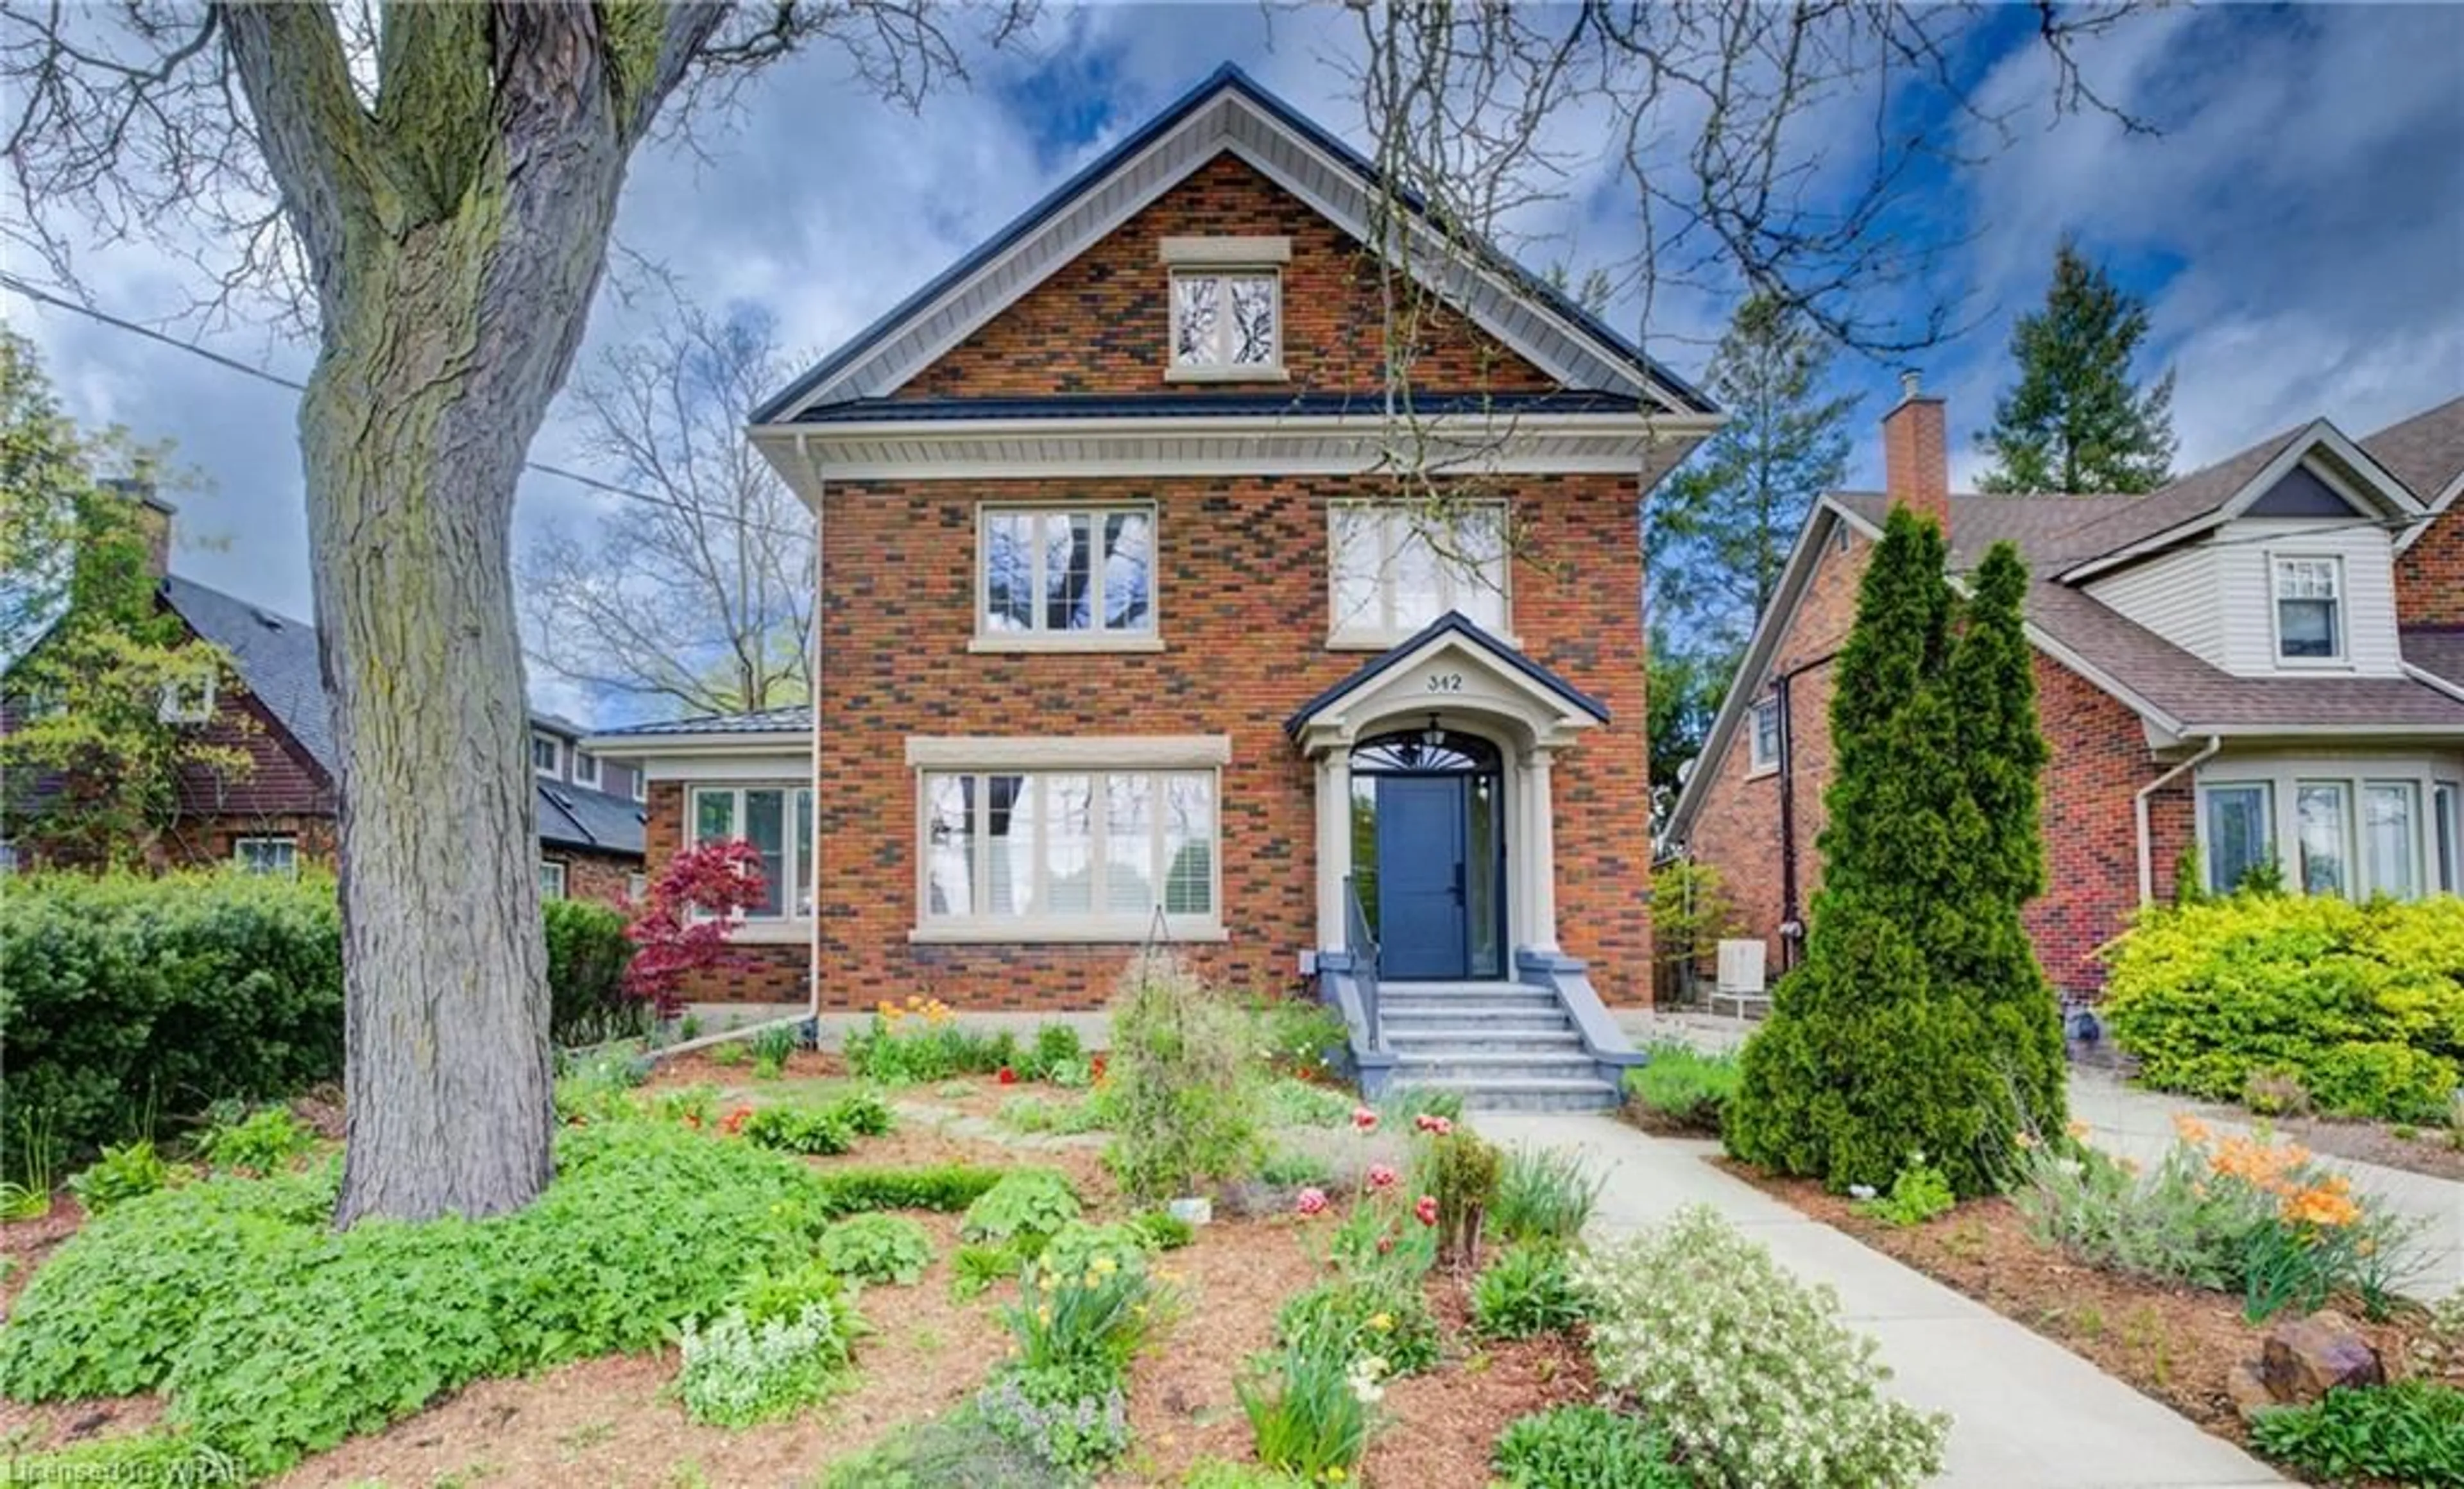 Home with brick exterior material for 342 Frederick St, Kitchener Ontario N2H 2N9